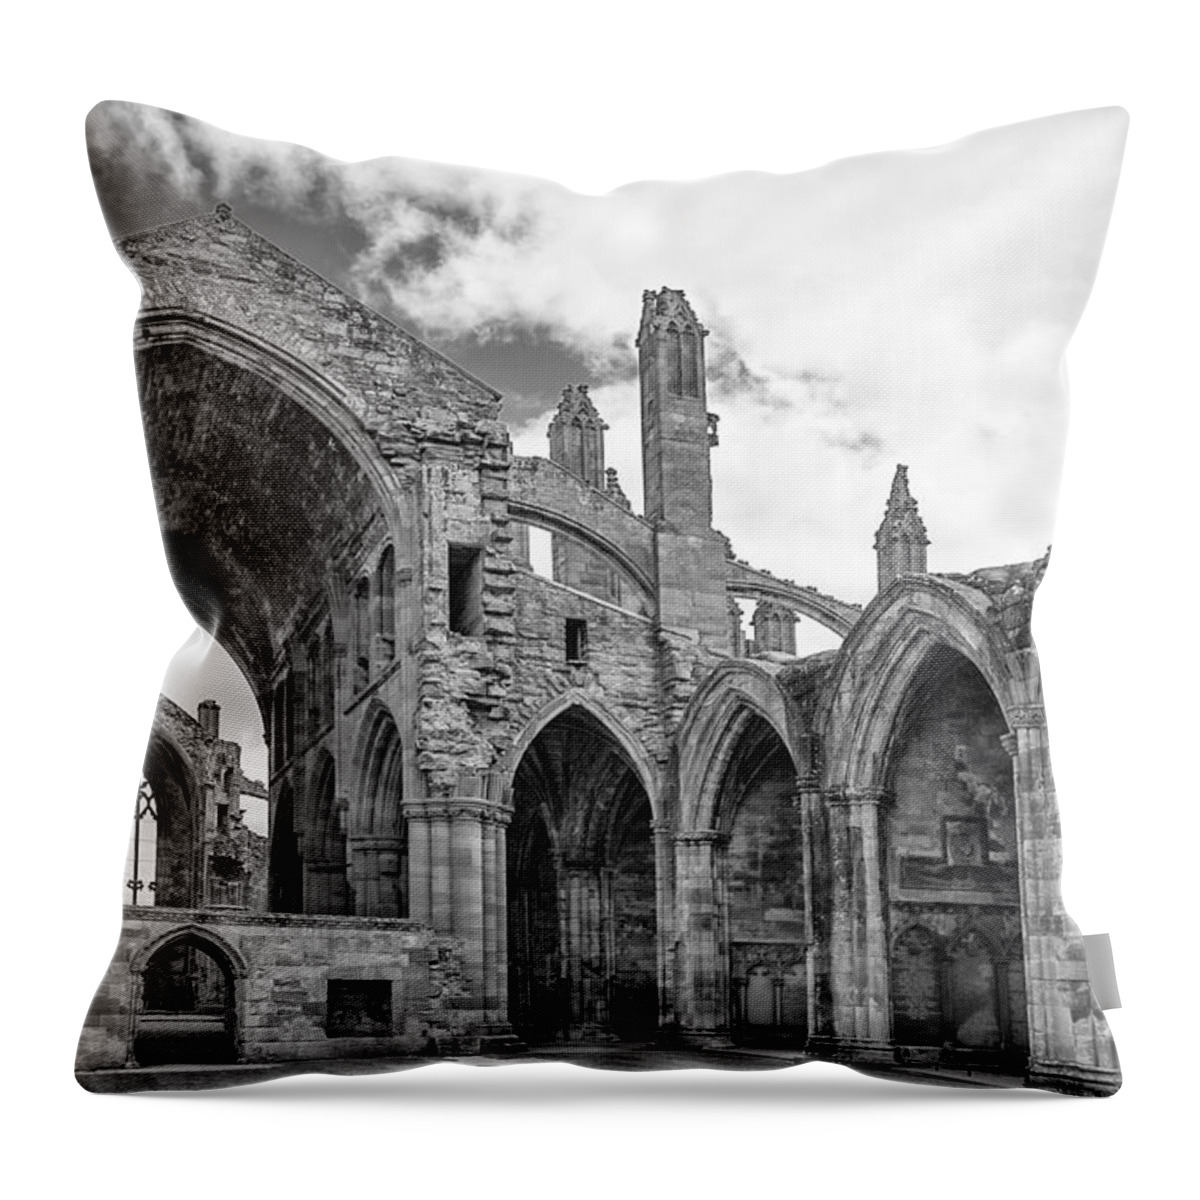 Abandoned Abbey Throw Pillow featuring the photograph Melrose Abbey by Elvira Butler